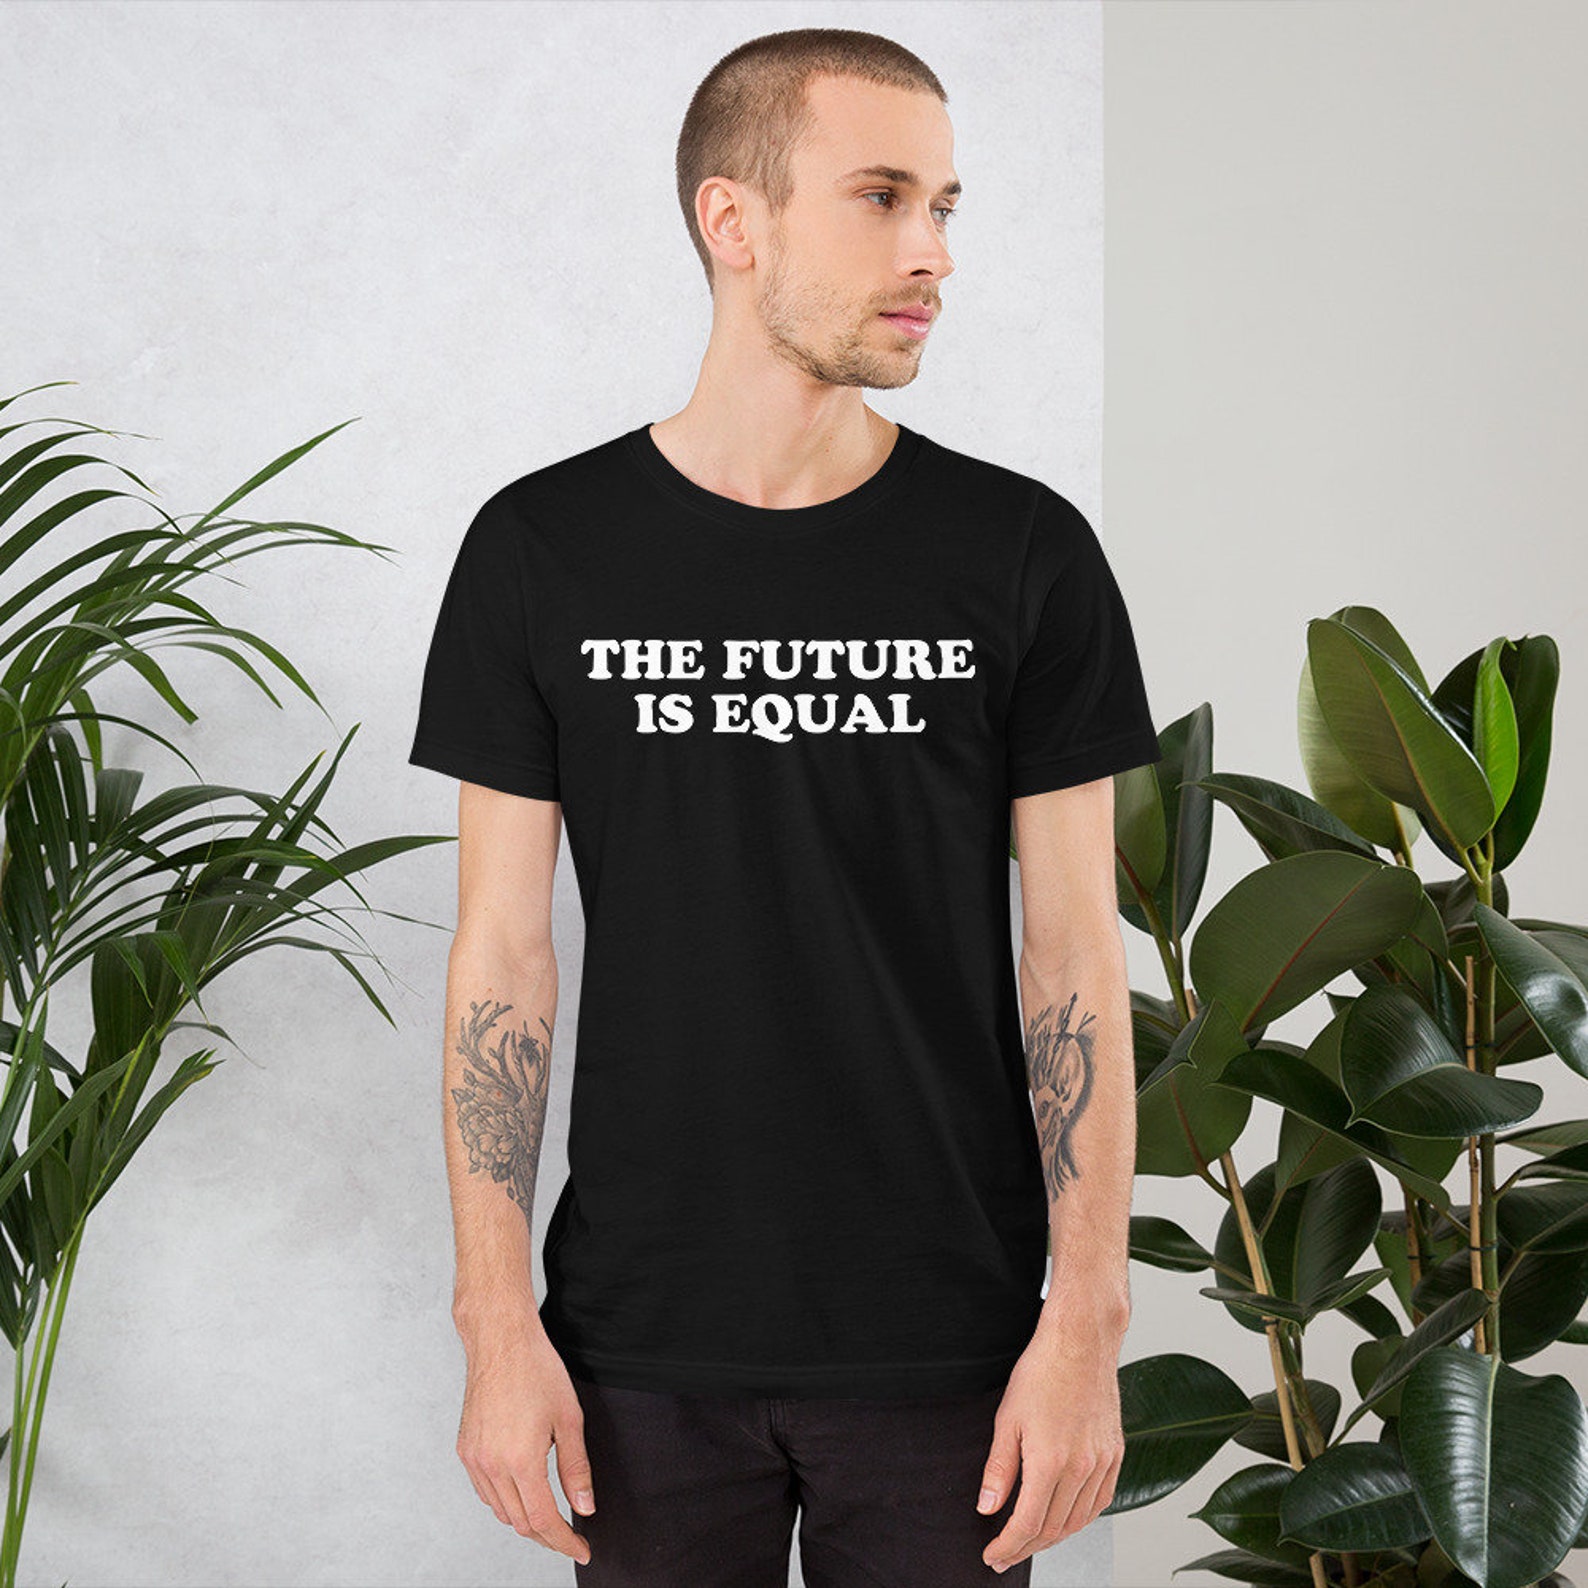 The Future Is Equal Shirt Equal Rights Shirt Women's | Etsy